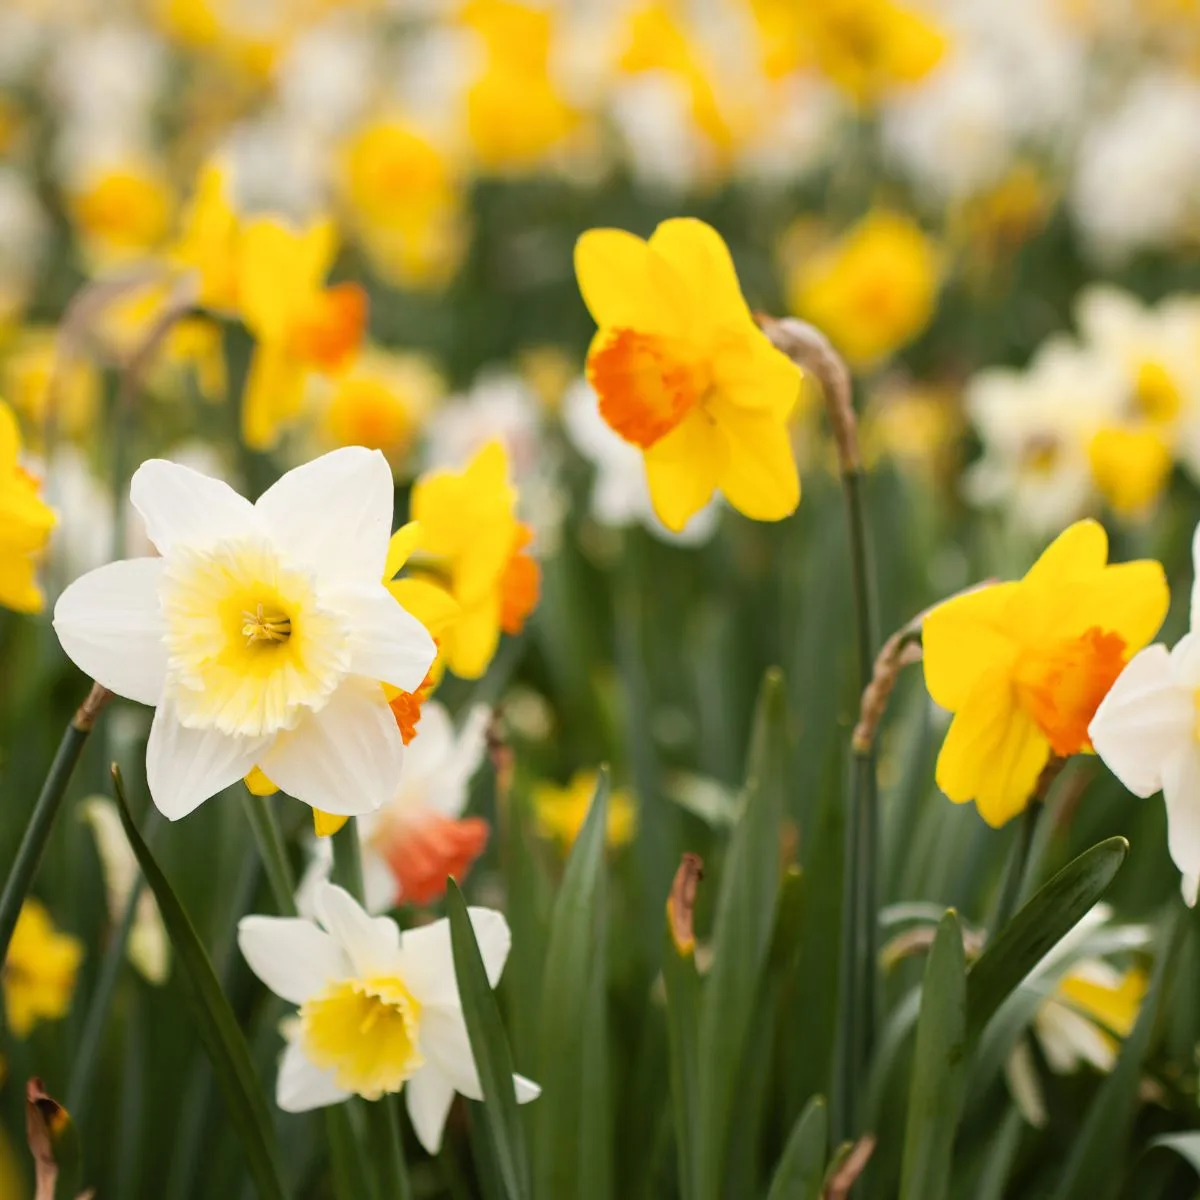 daffodils in a variety of yellow shades: from pale to dark, and some with orange centers. 